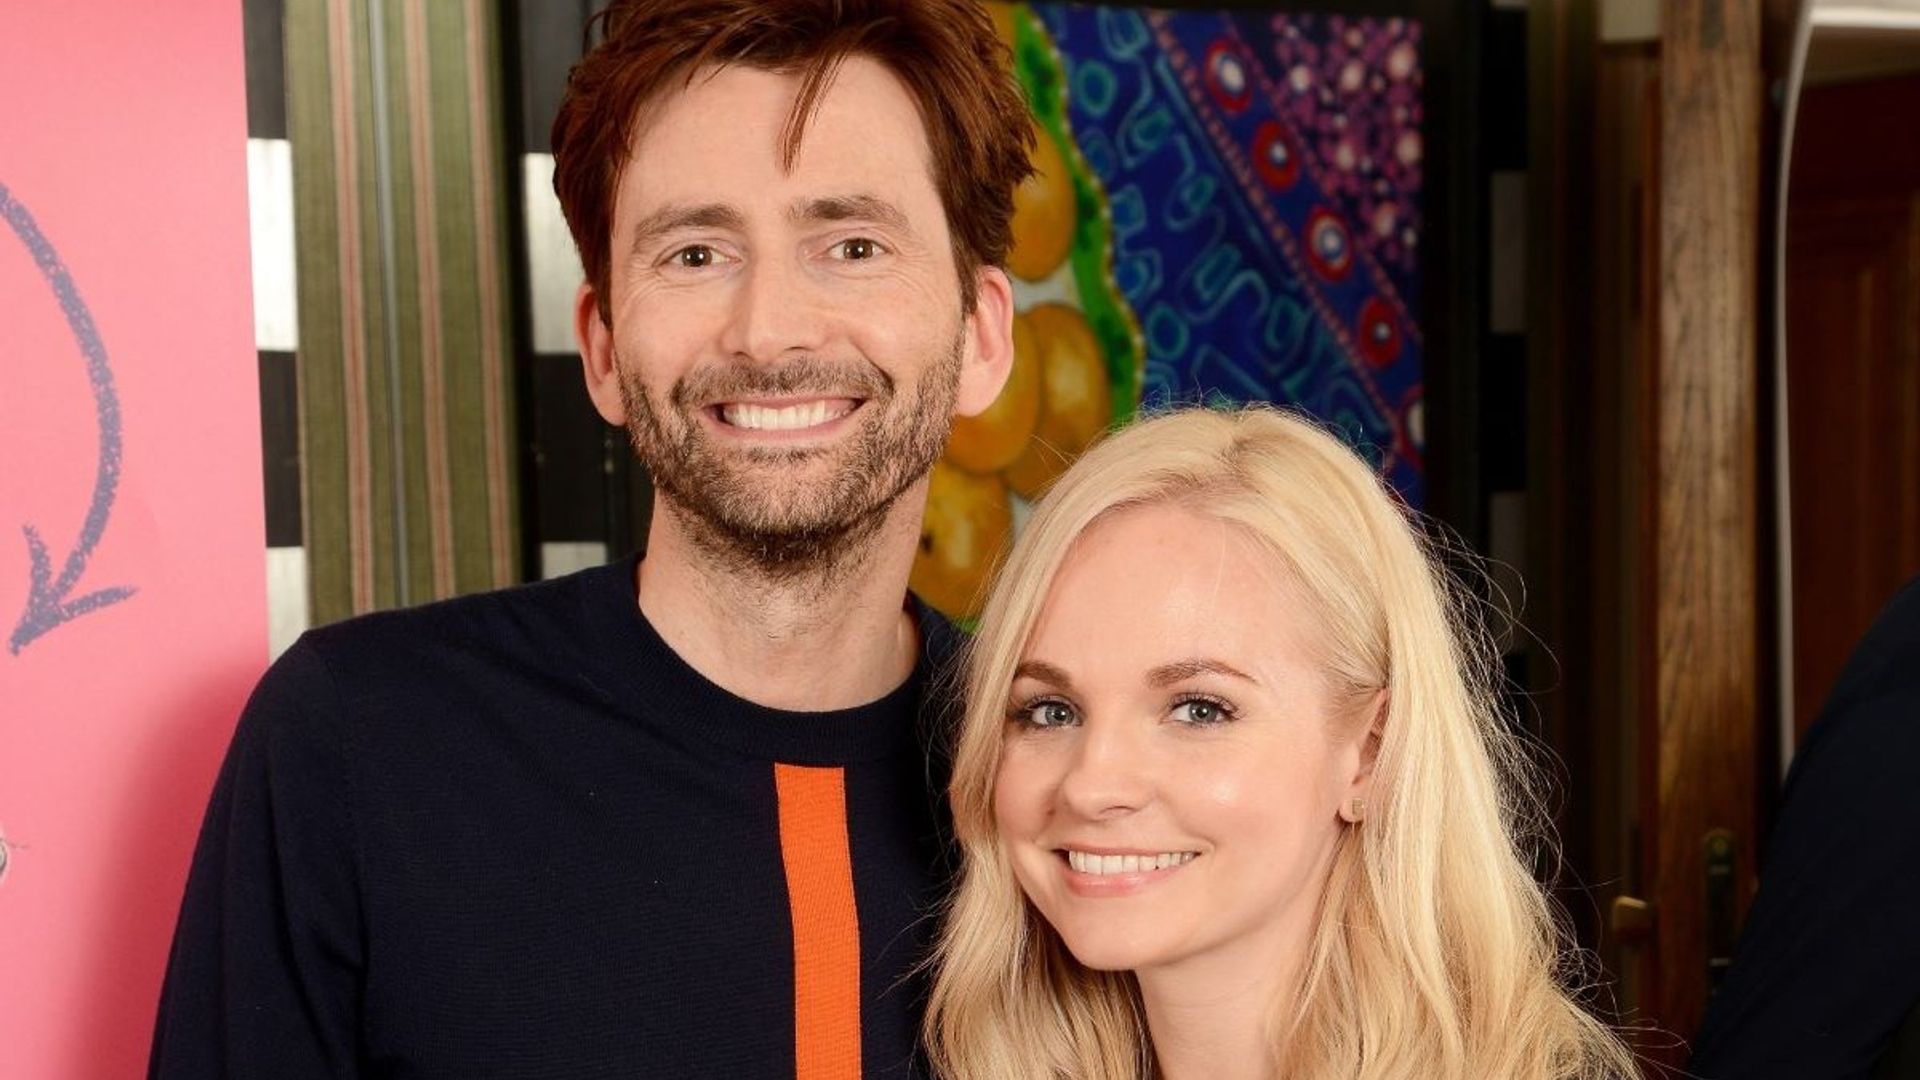 Georgia Tennant shares rare breastfeeding photo for special reason - and fans react